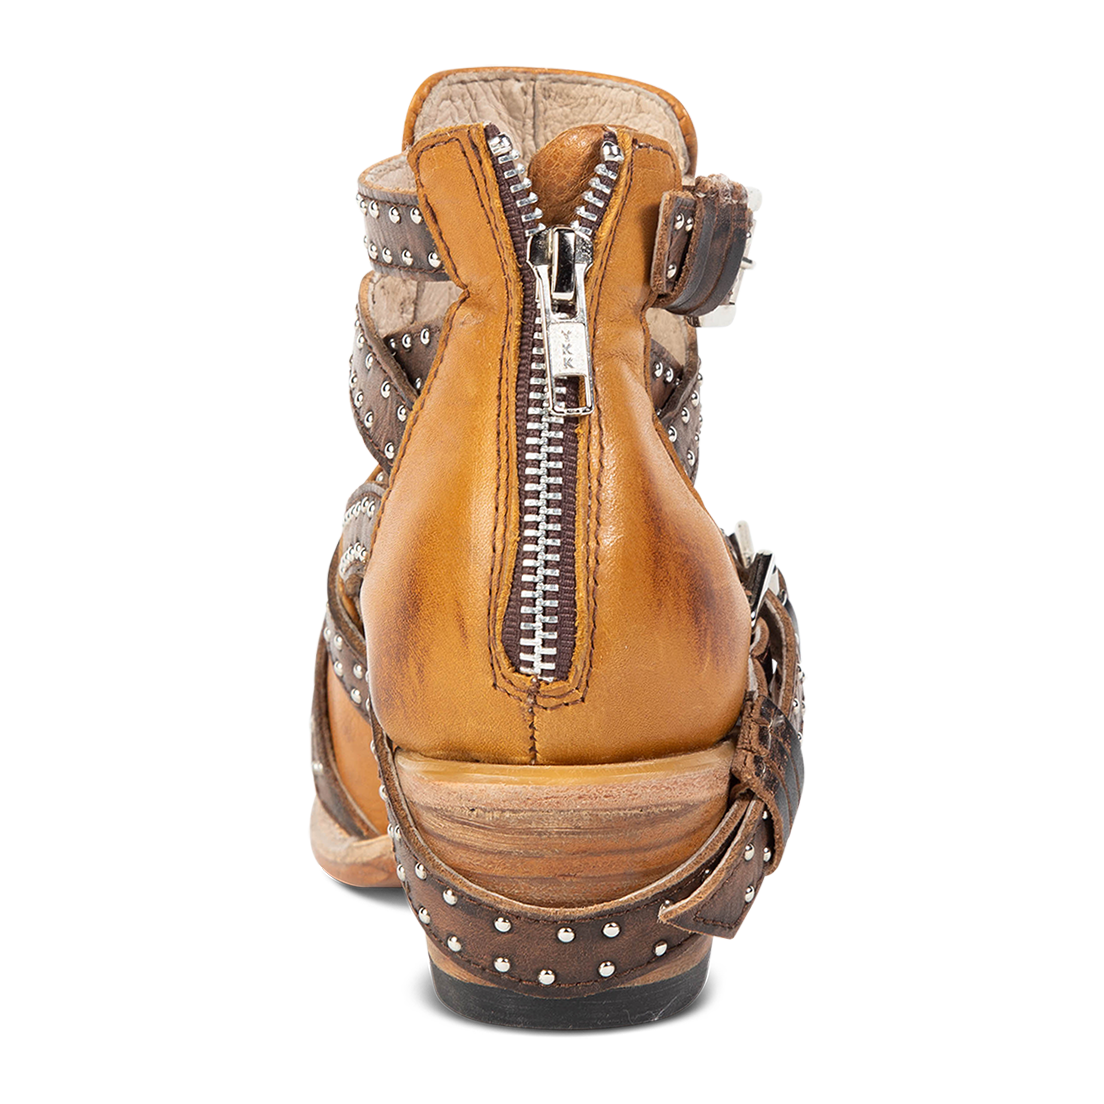 Back view showing zipper closure and mid heel on FREEBIRD women's Wasp wheat ankle bootie